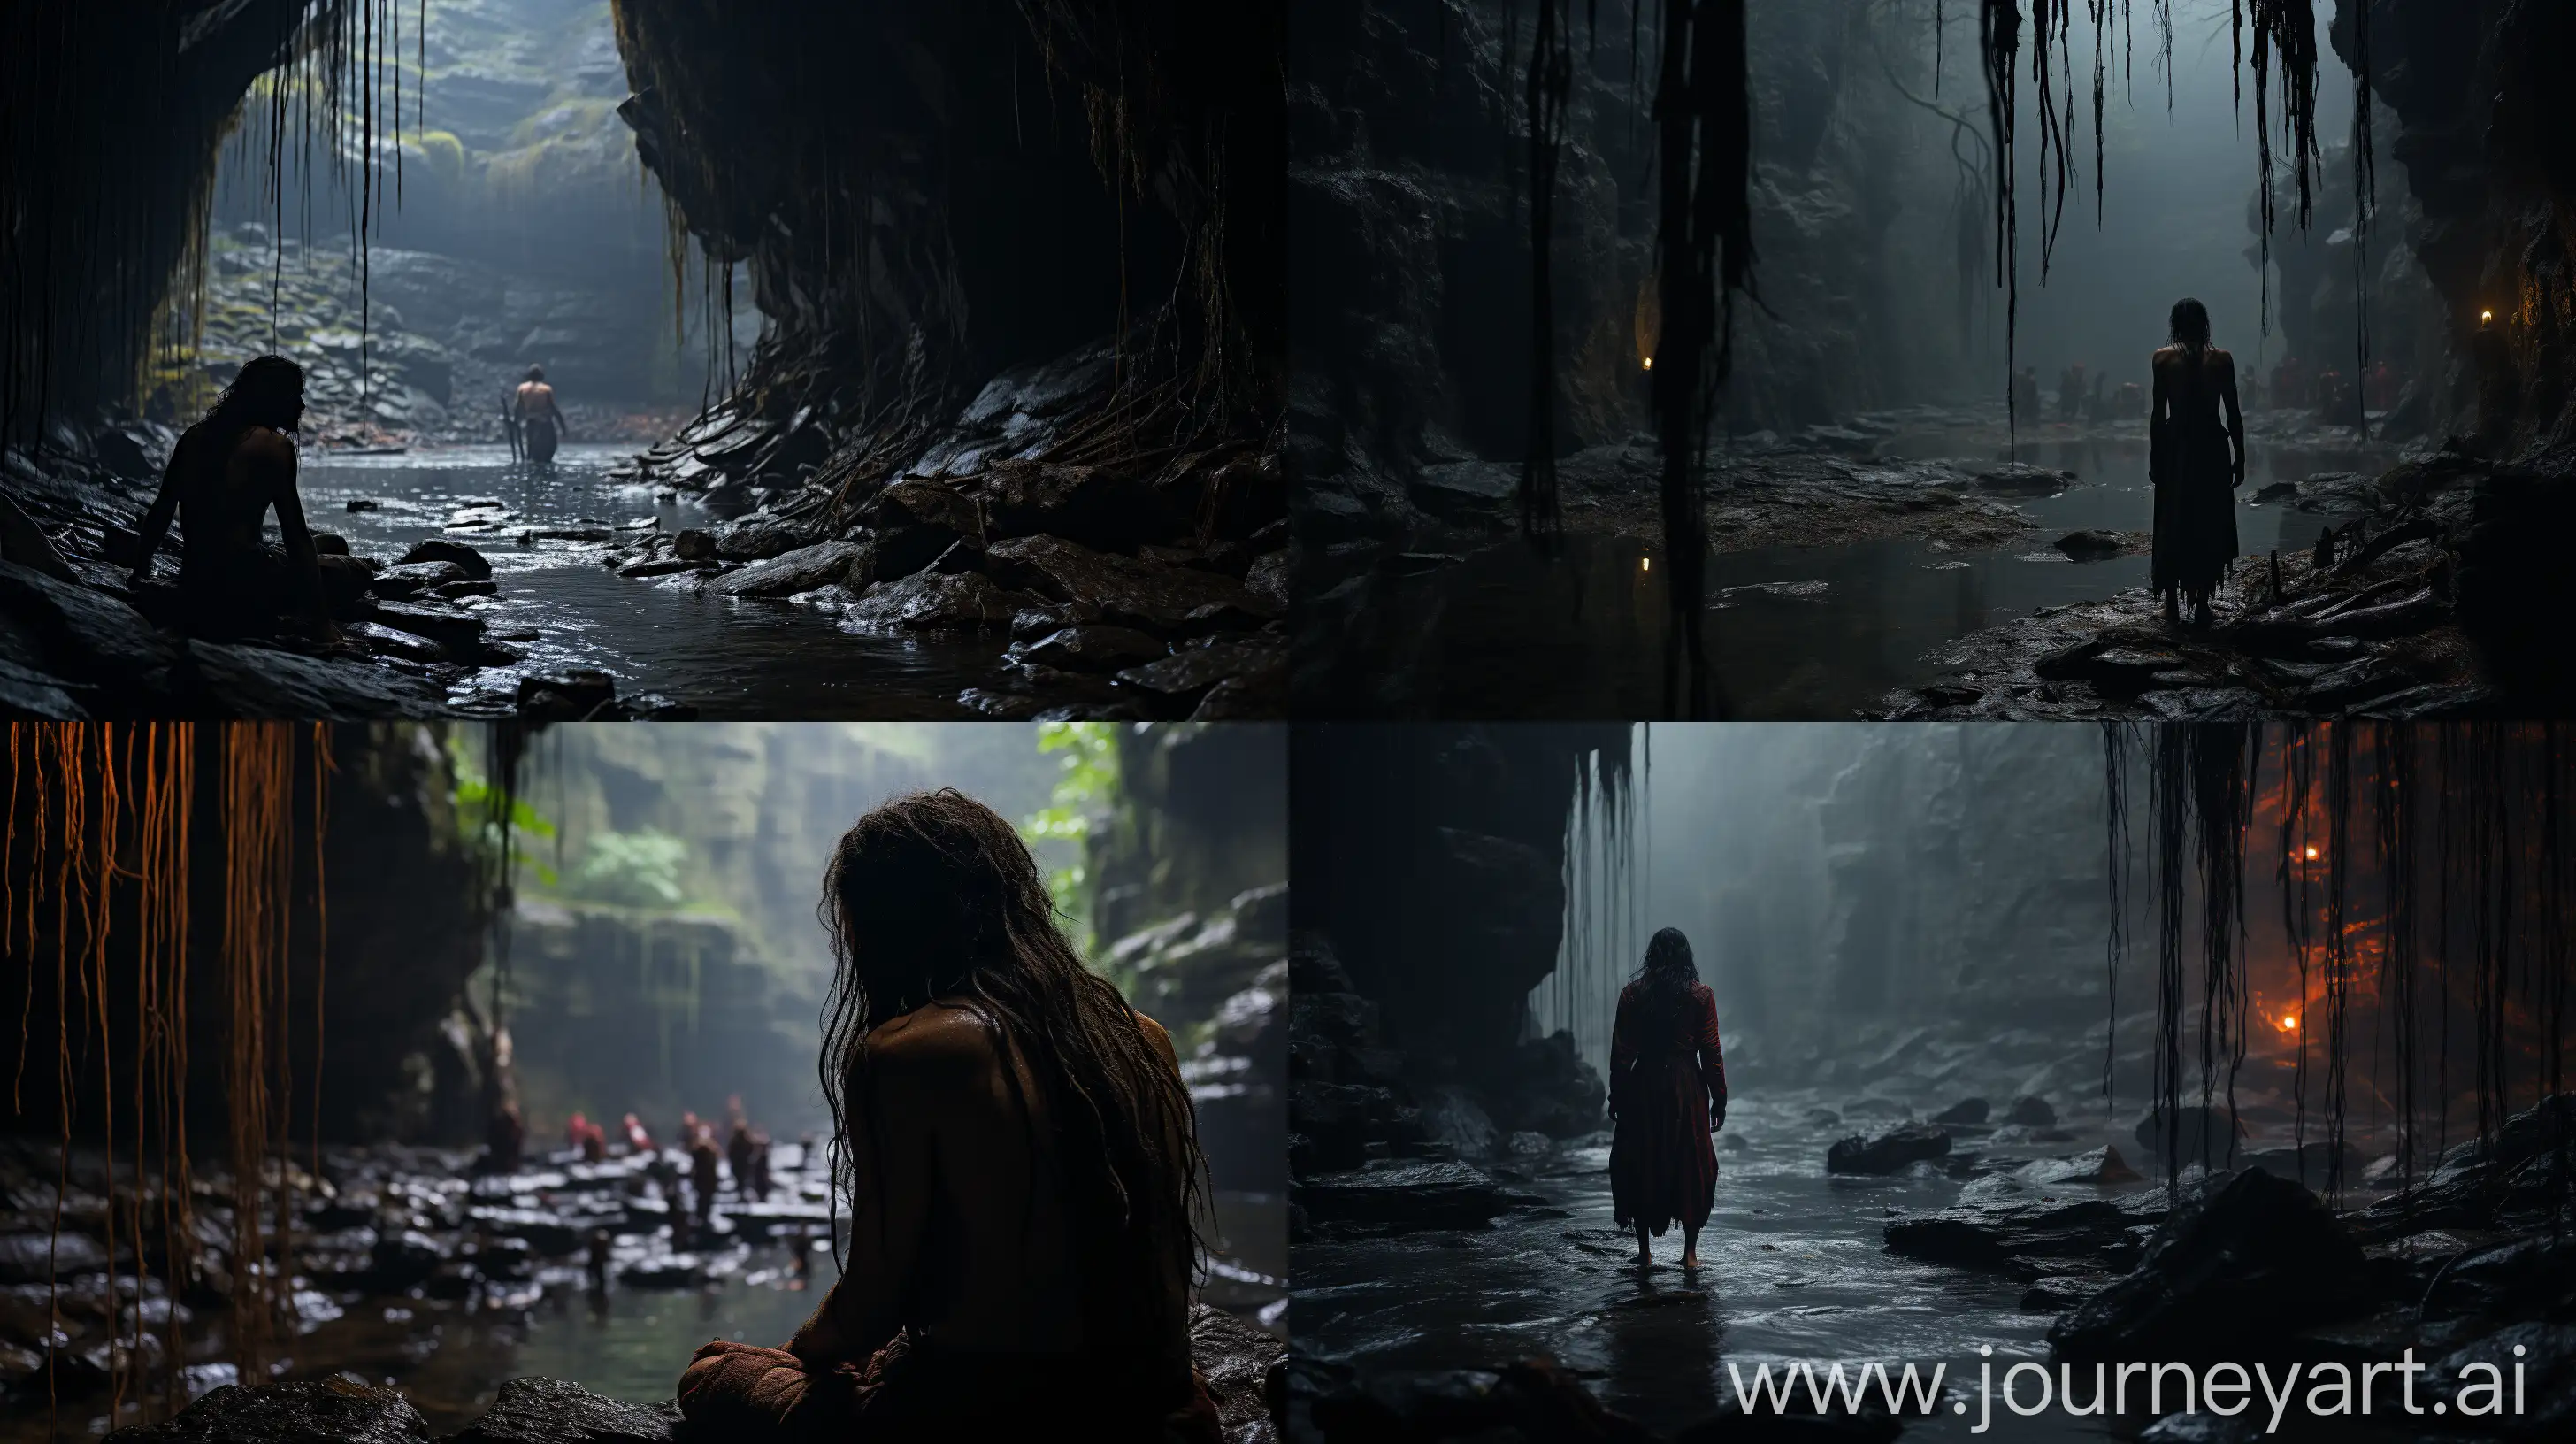 Ancient-Indian-Antagonist-in-Cave-with-Wildlife-Ambience